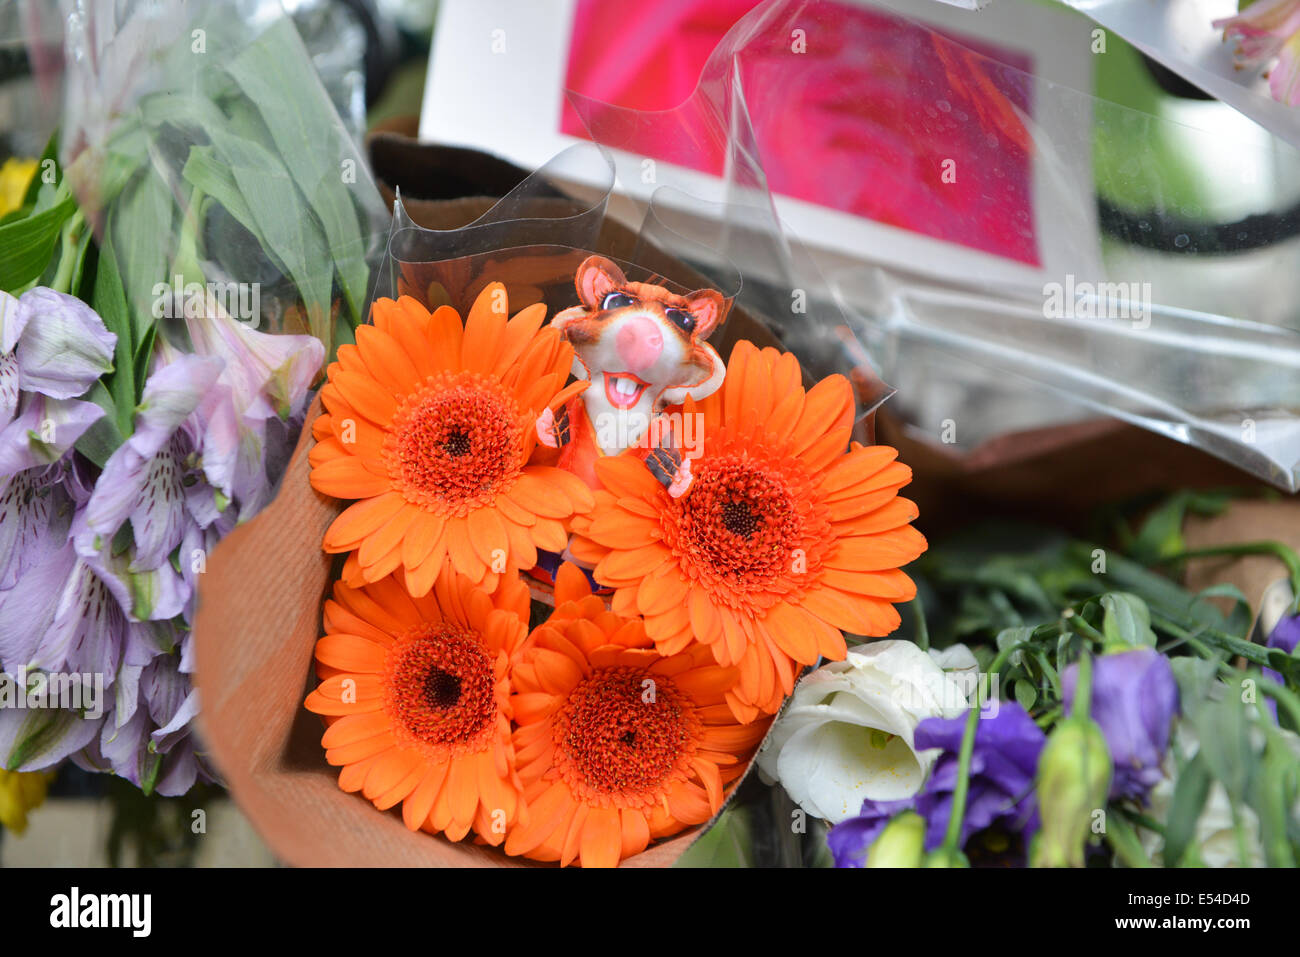 Hyde Park Gate, London, UK. Cards and flowers left outside the gates of the Dutch Embassy in London as a mark of respect for those who died on the plane in Ukraine. Credit:  Matthew Chattle/Alamy Live News Stock Photo